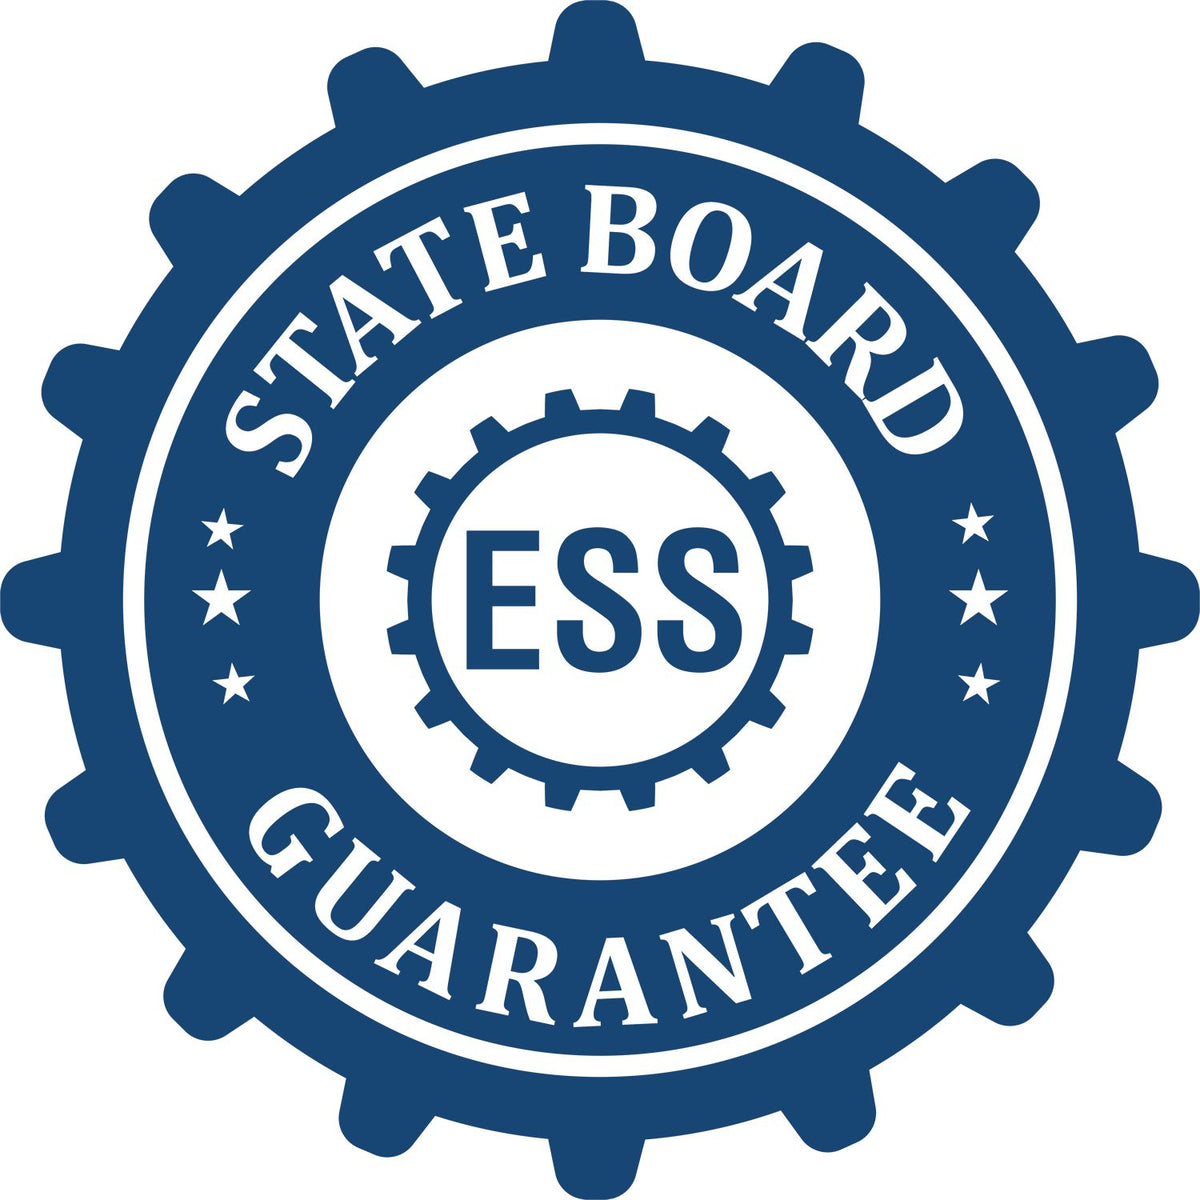 An emblem in a gear shape illustrating a state board guarantee for the Digital Illinois PE Stamp and Electronic Seal for Illinois Engineer product.